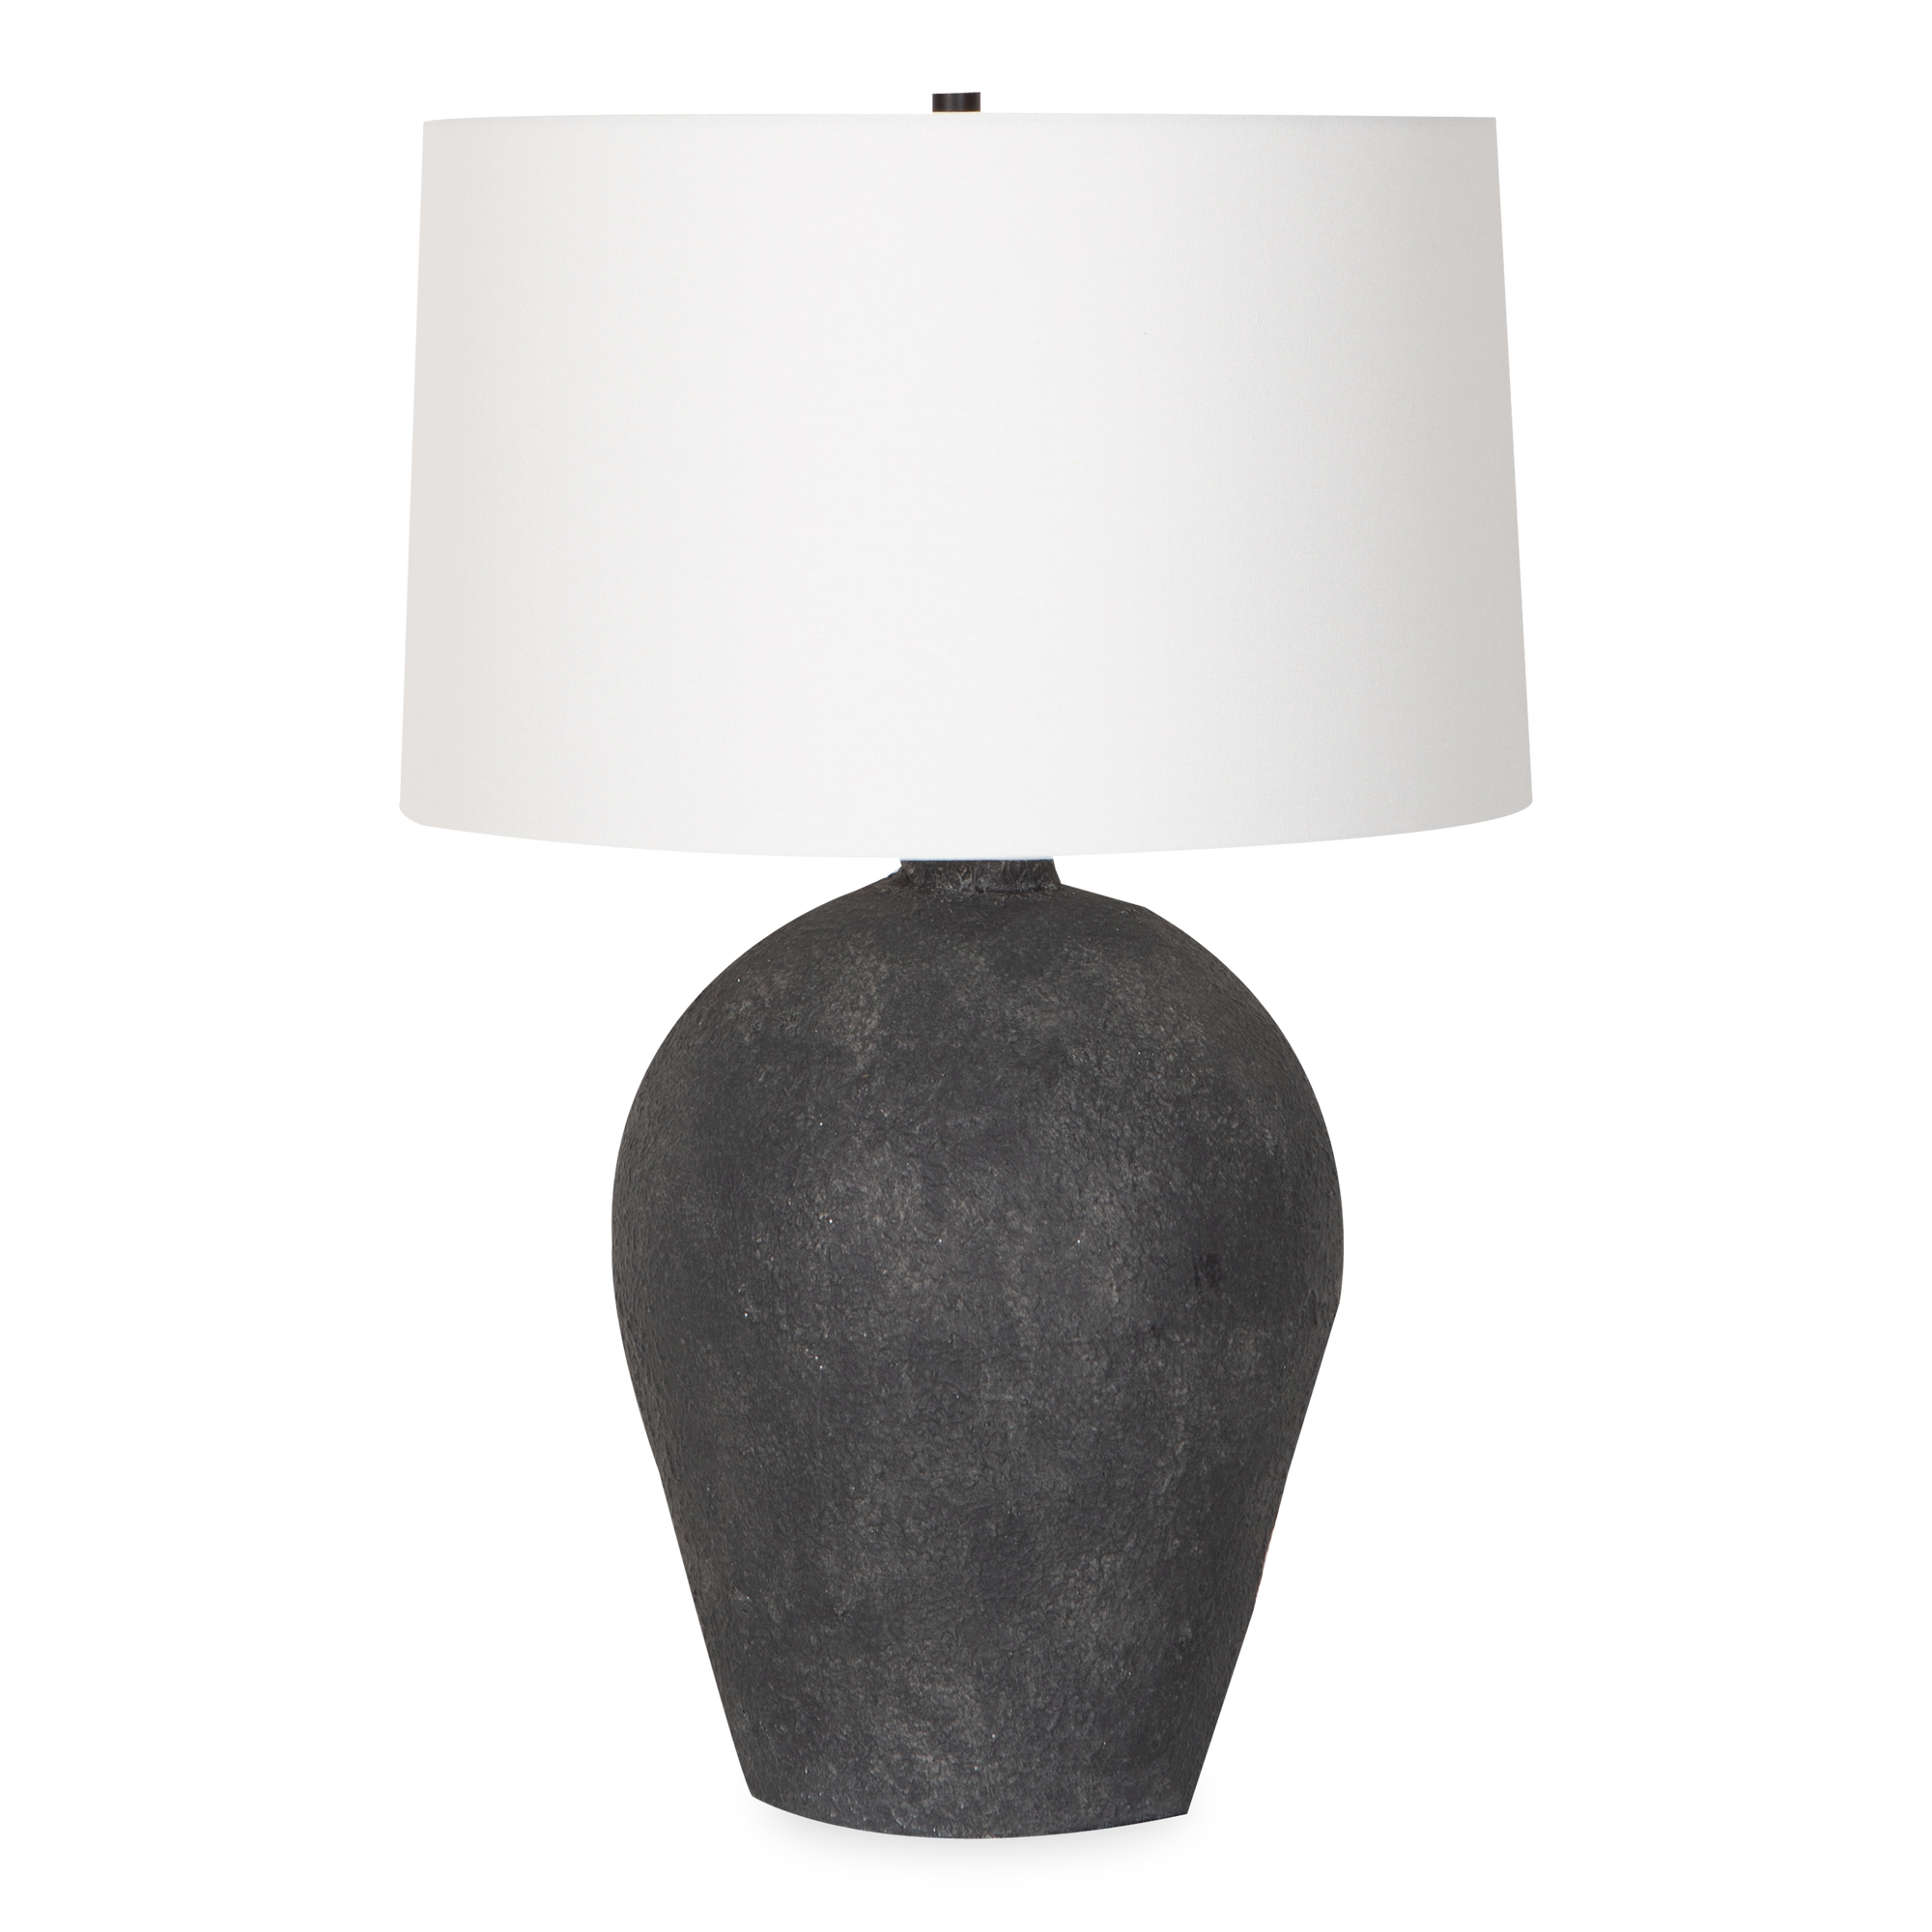 A sophisticated way to illuminate a room all while adding sculptural beauty to your home decor, the Leigh Table Lamp contrasts a dark textured base with a crisp lampshade.